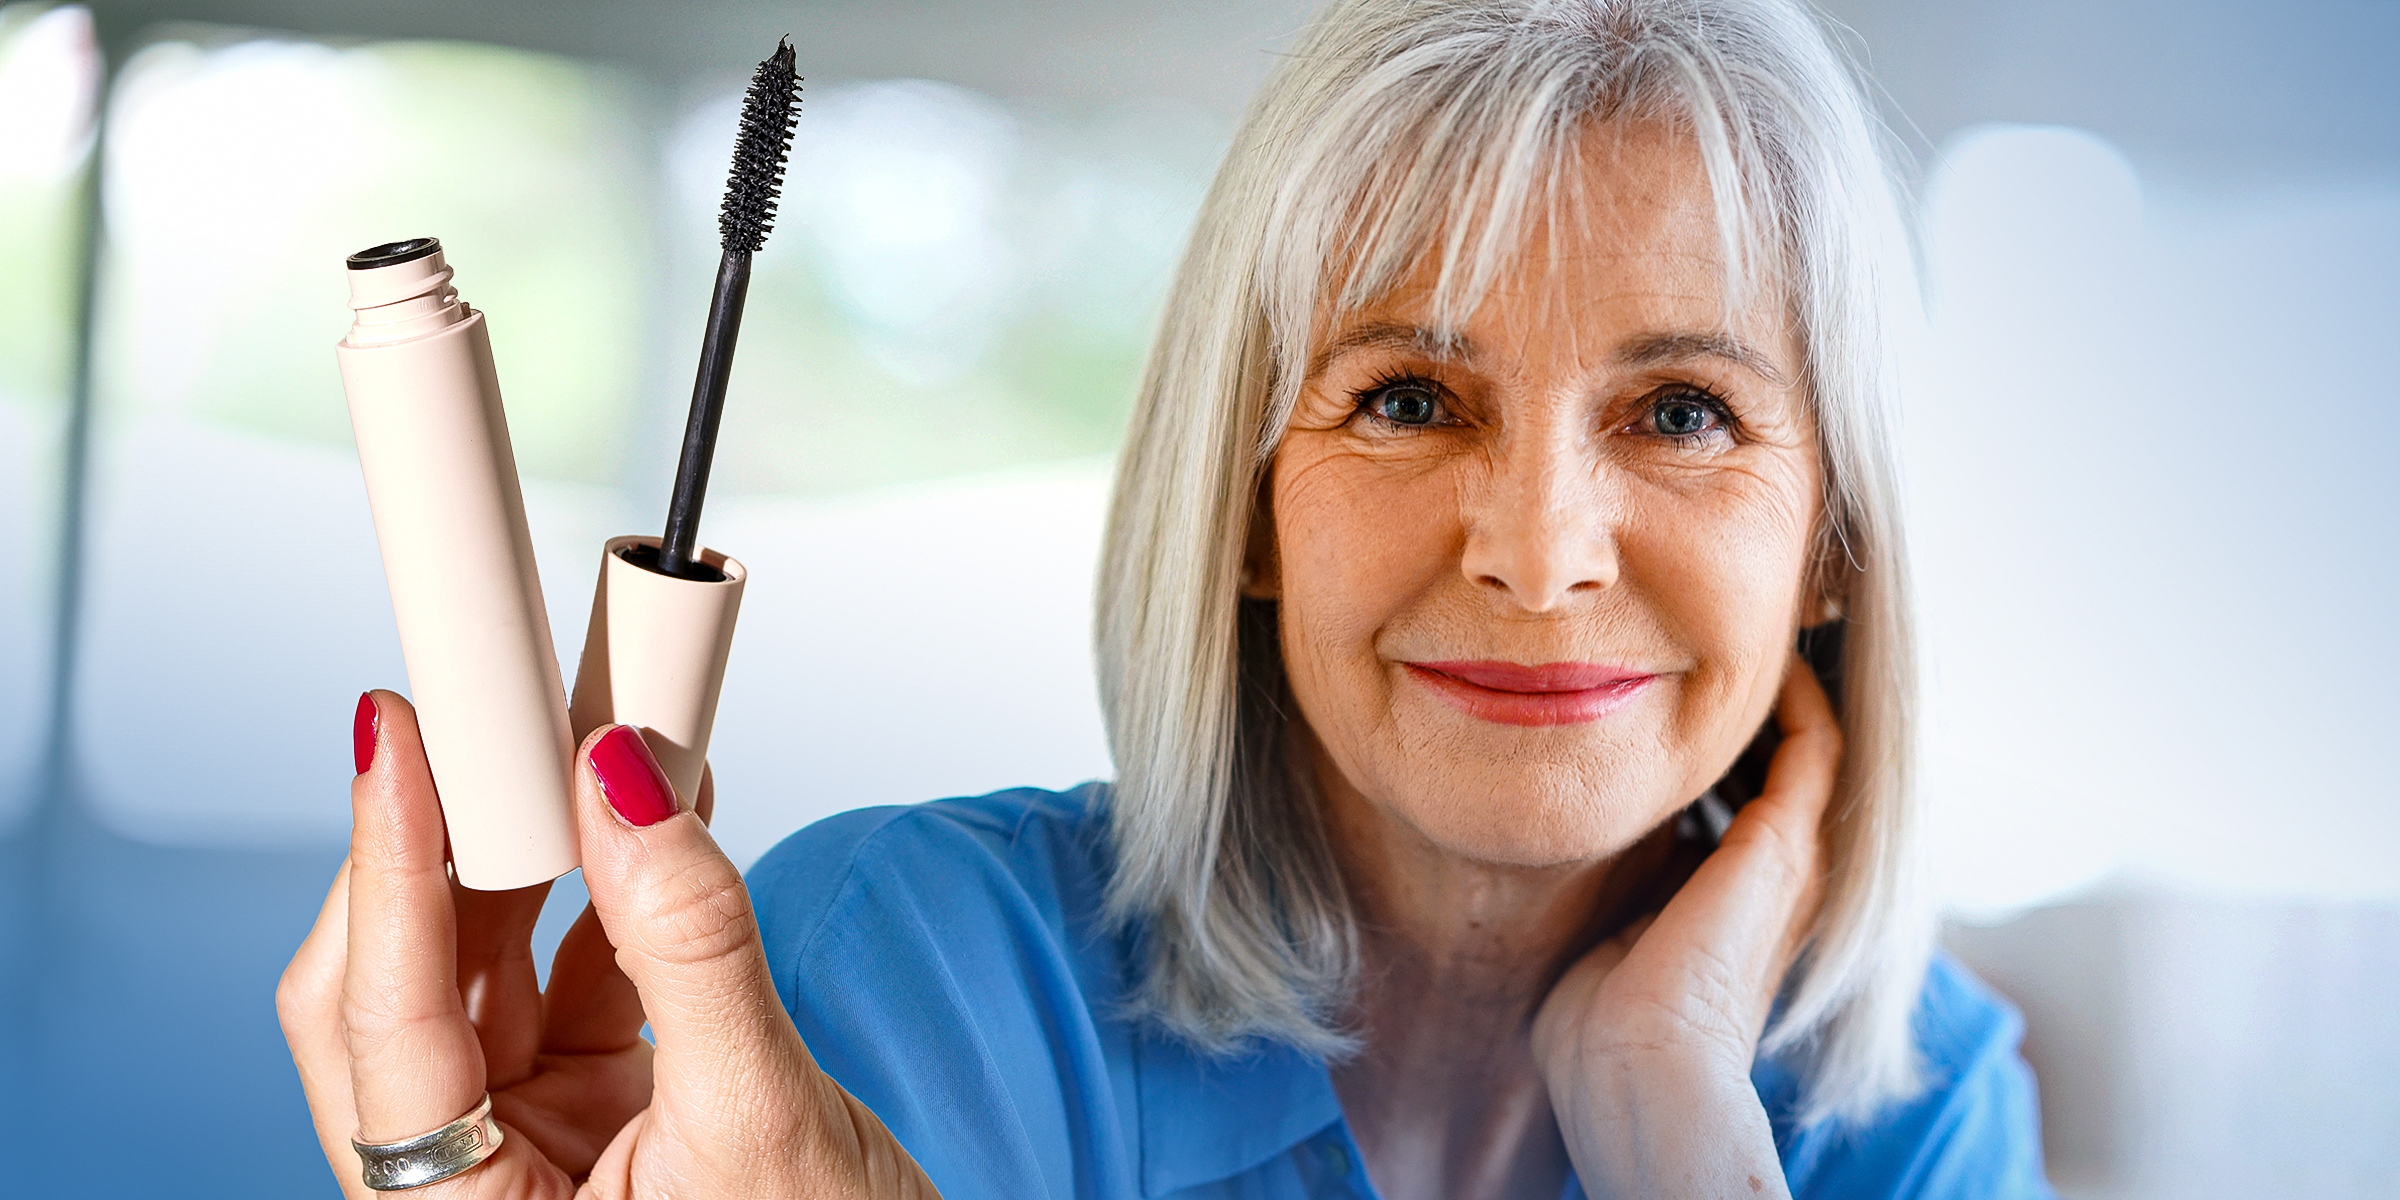 Mascara | A smiling woman | Source: Shutterstock | Getty Images